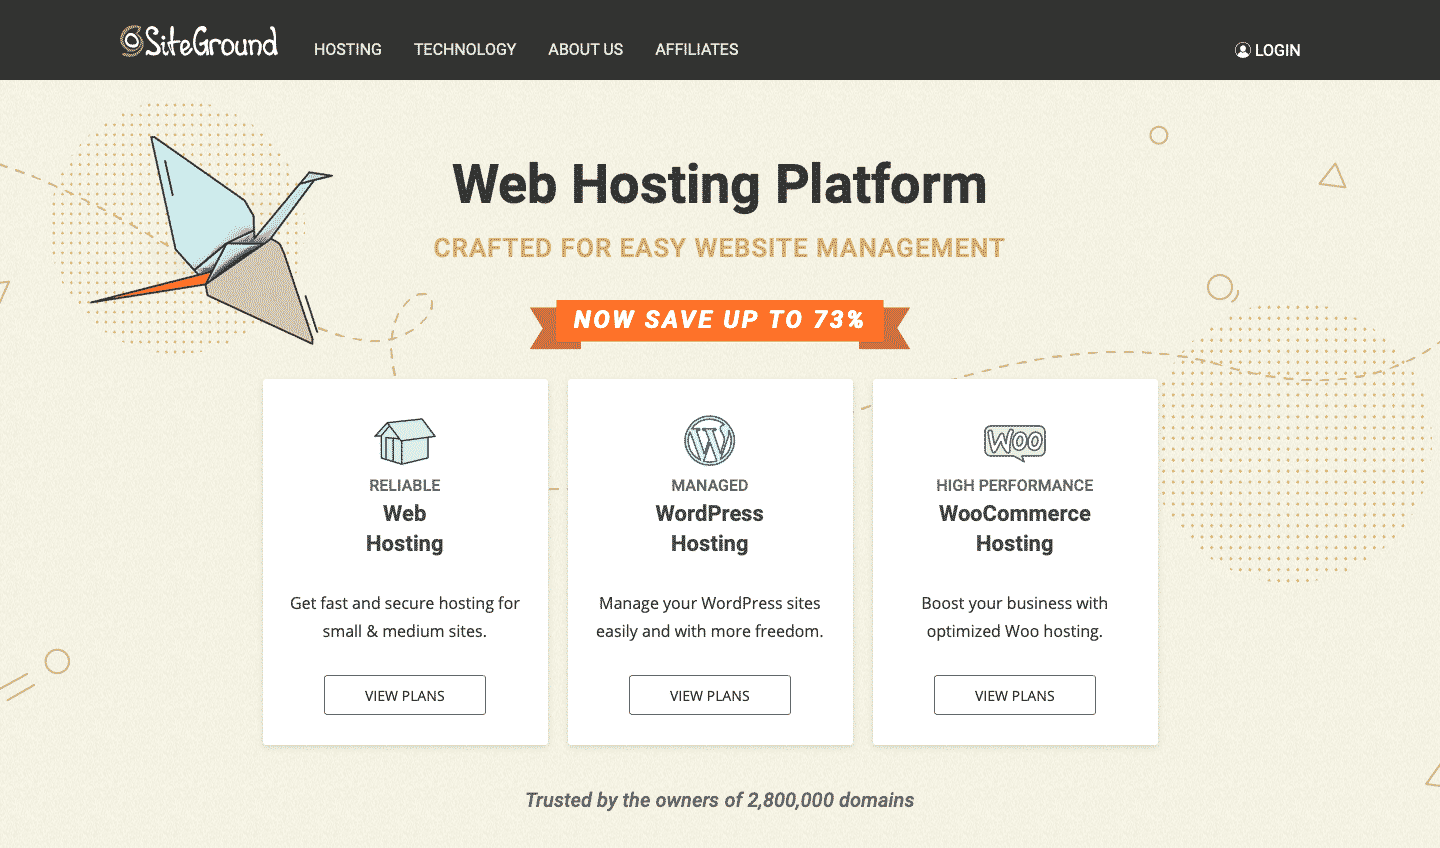 SiteGround is best web hosting service that offer hosting for WordPress & Business sites like VPS, Cloud, Managed WordPress, WooCommerce, etc.